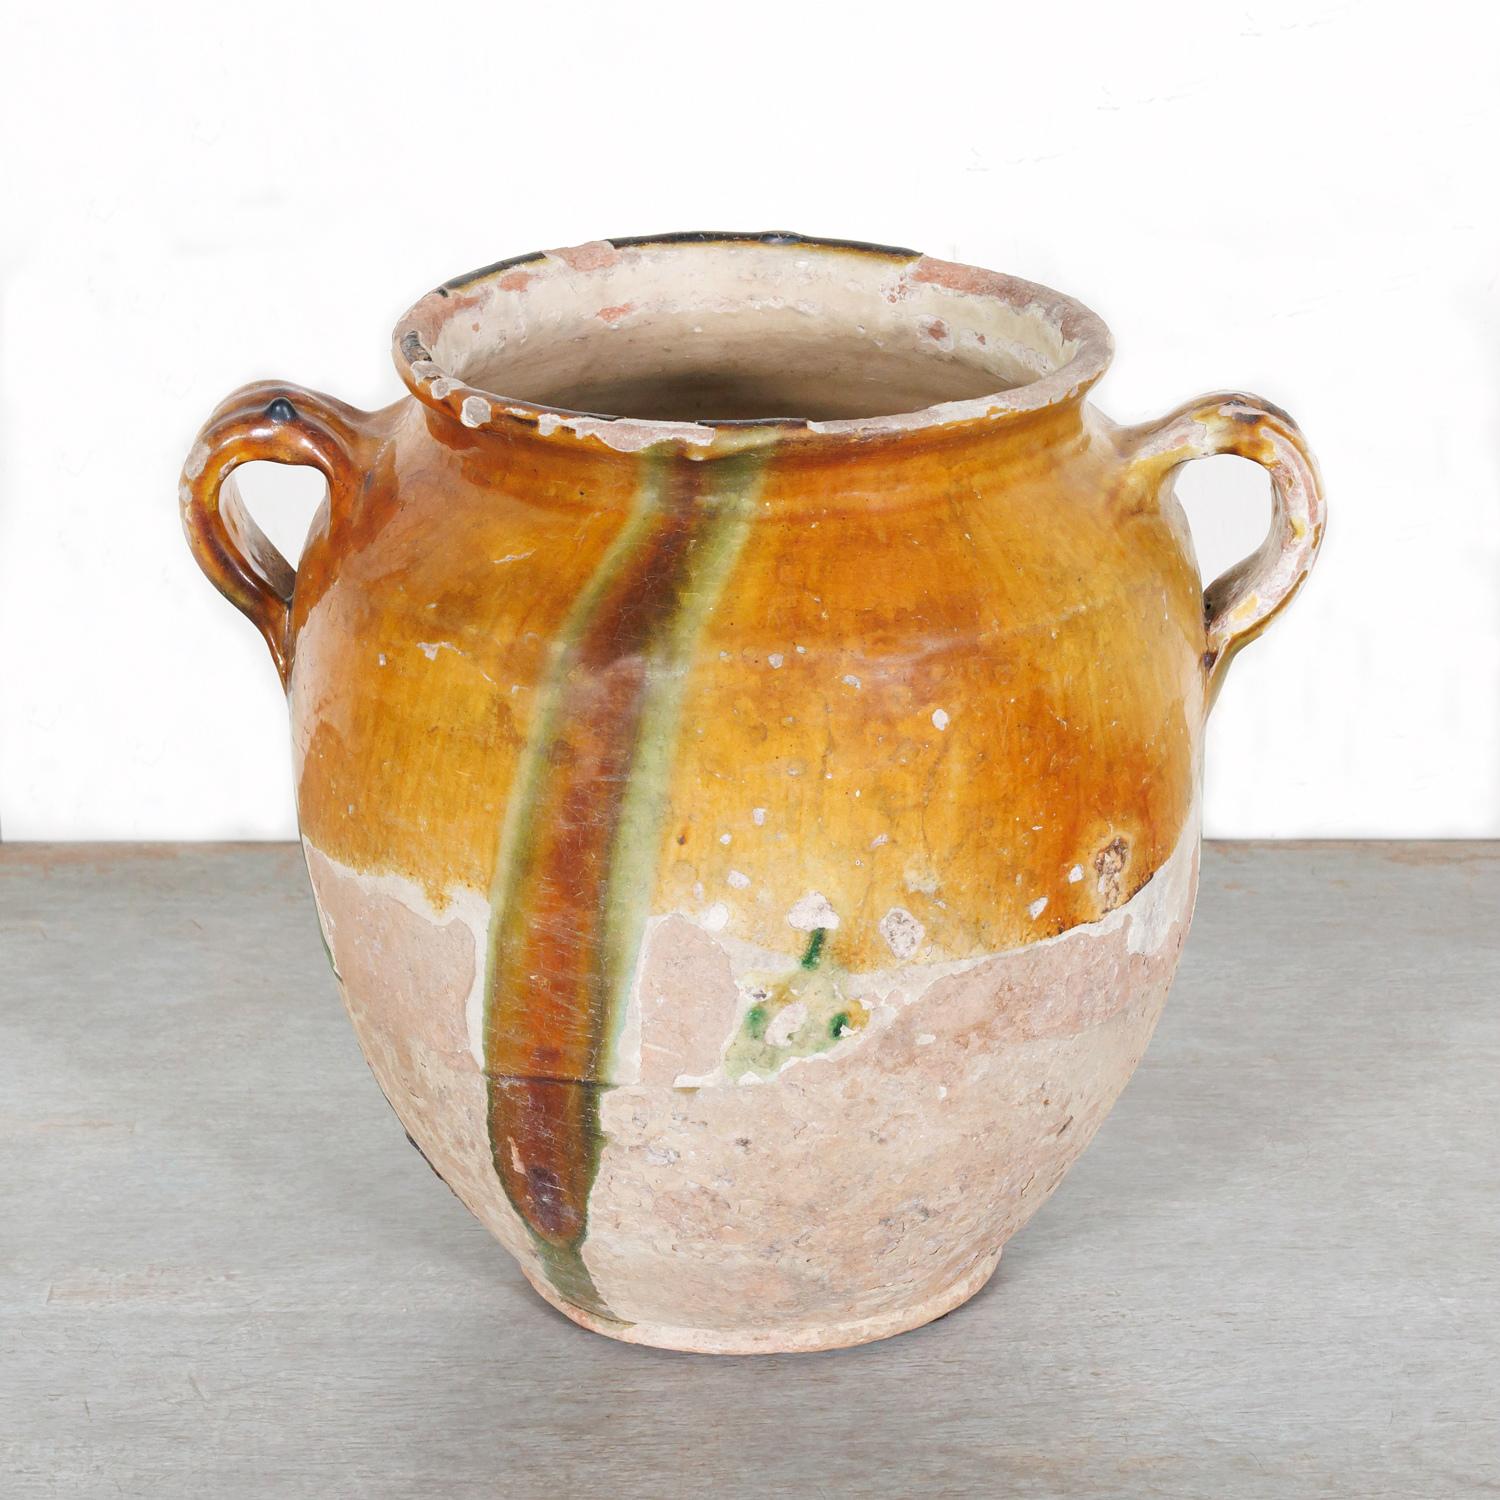 Pottery 19th Century French Confit Pot with Yellow Ochre Glaze w/Green and Caramel Drips